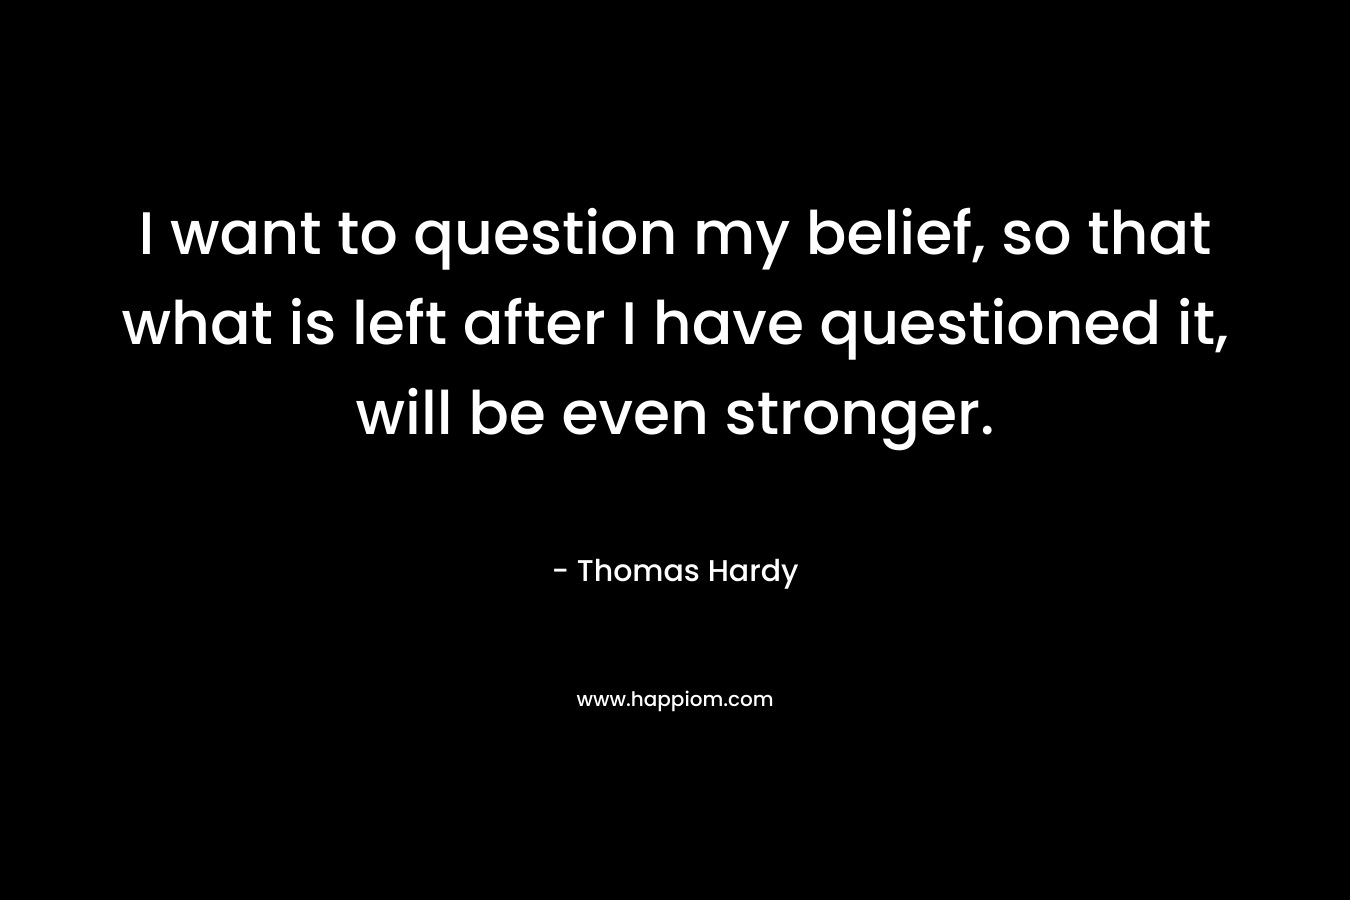 I want to question my belief, so that what is left after I have questioned it, will be even stronger. – Thomas Hardy